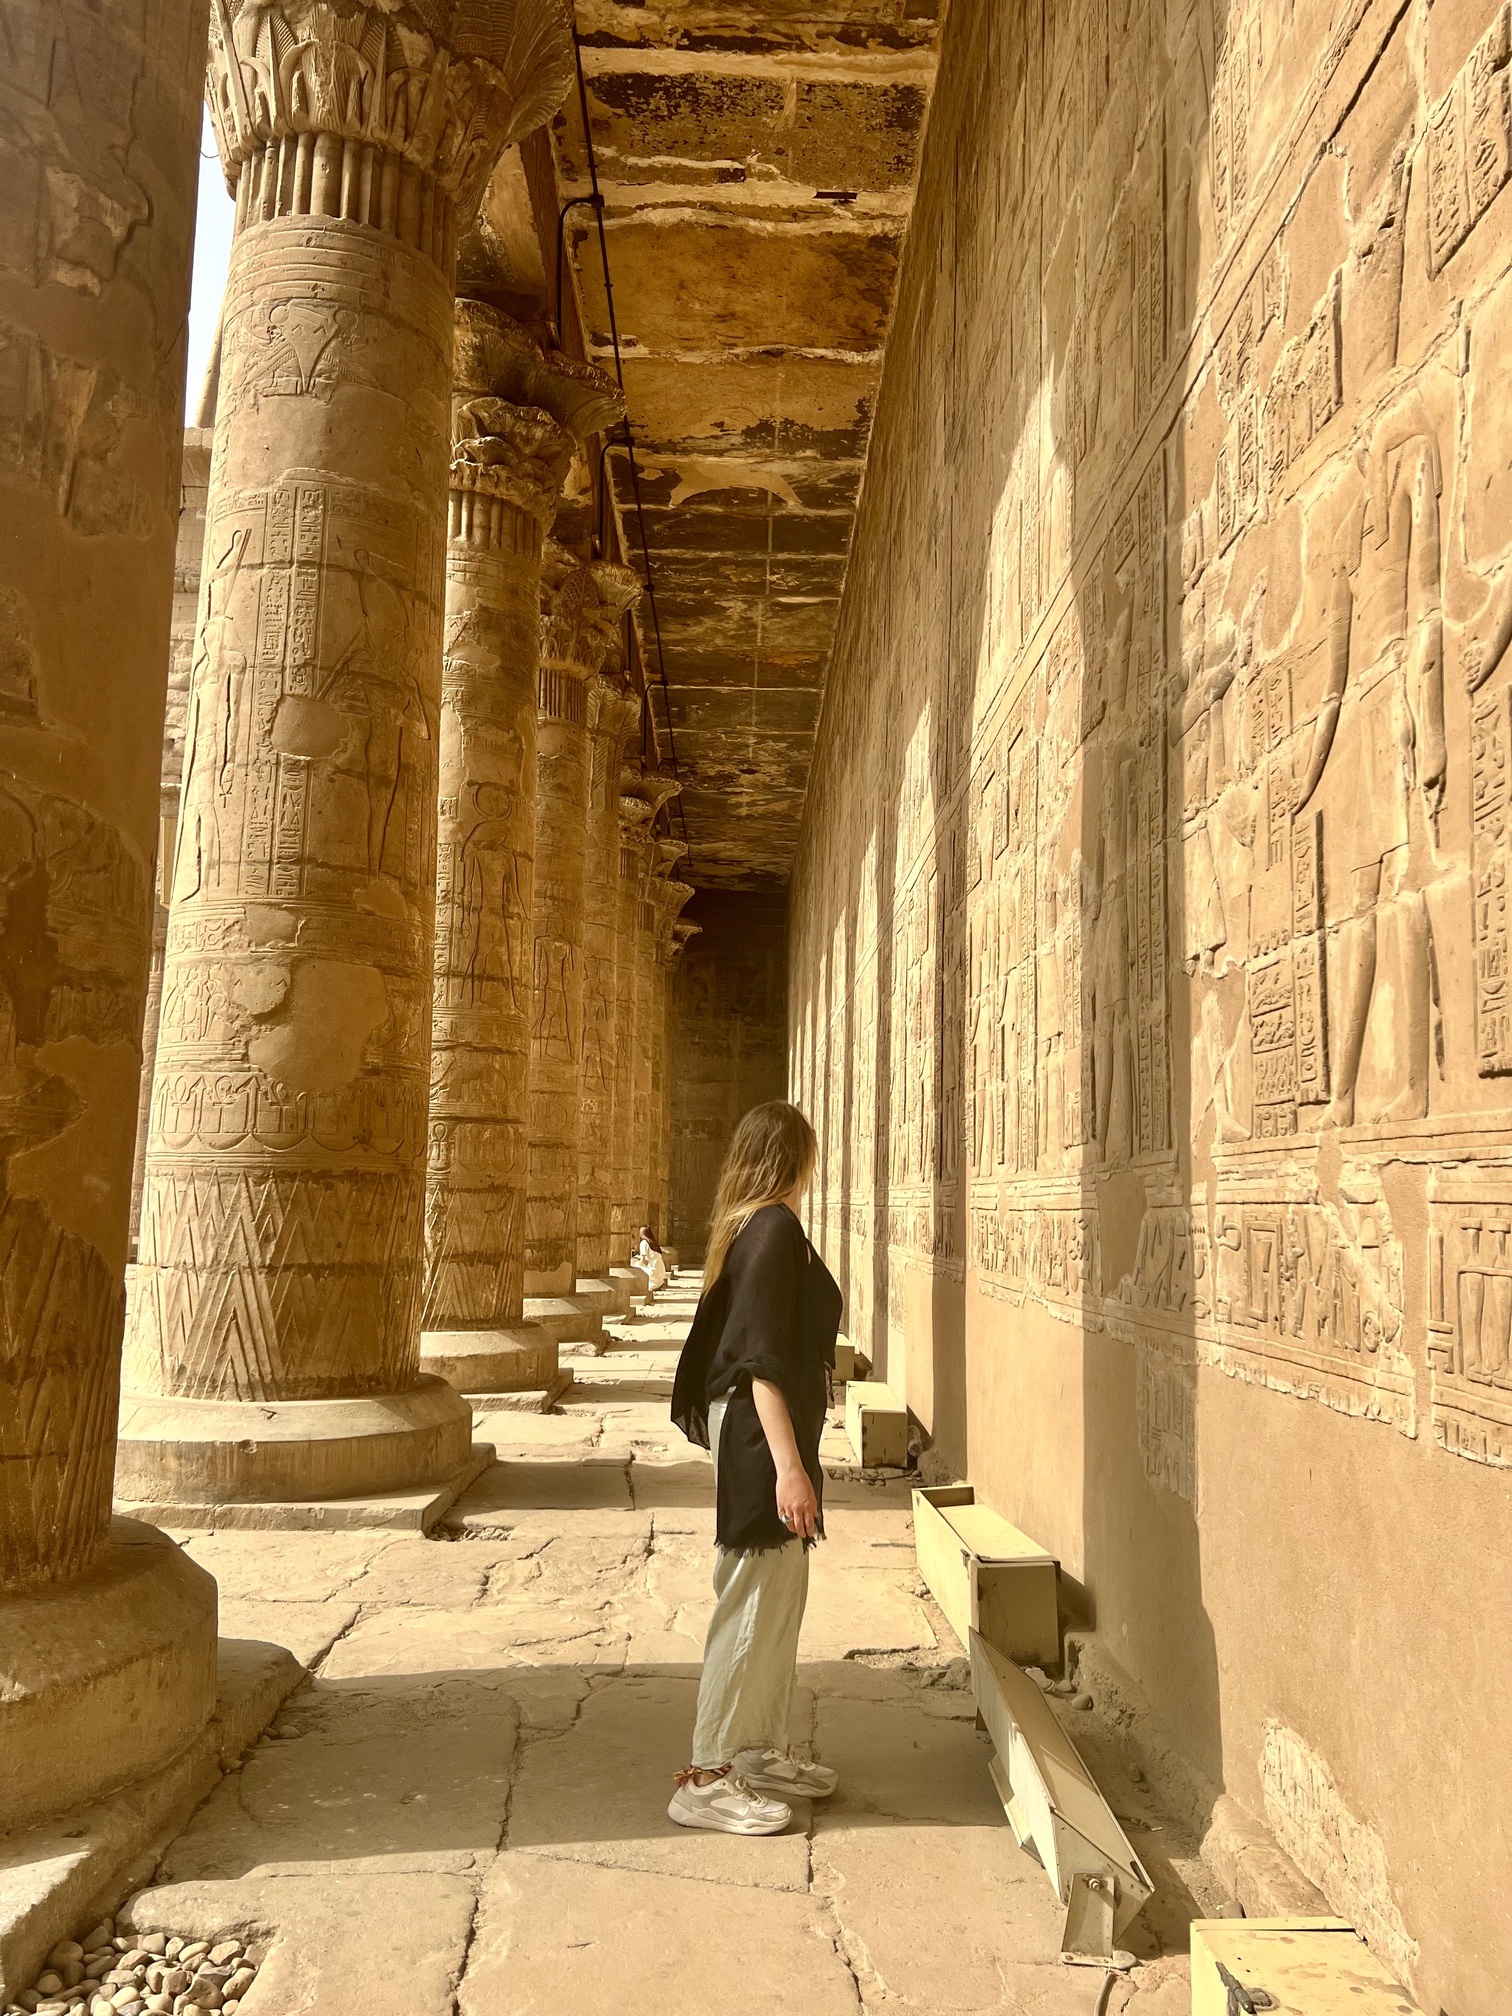 Captivating image of Egypt showcasing the ancient wonders of Egypt's iconic landmarks and rich cultural heritage.